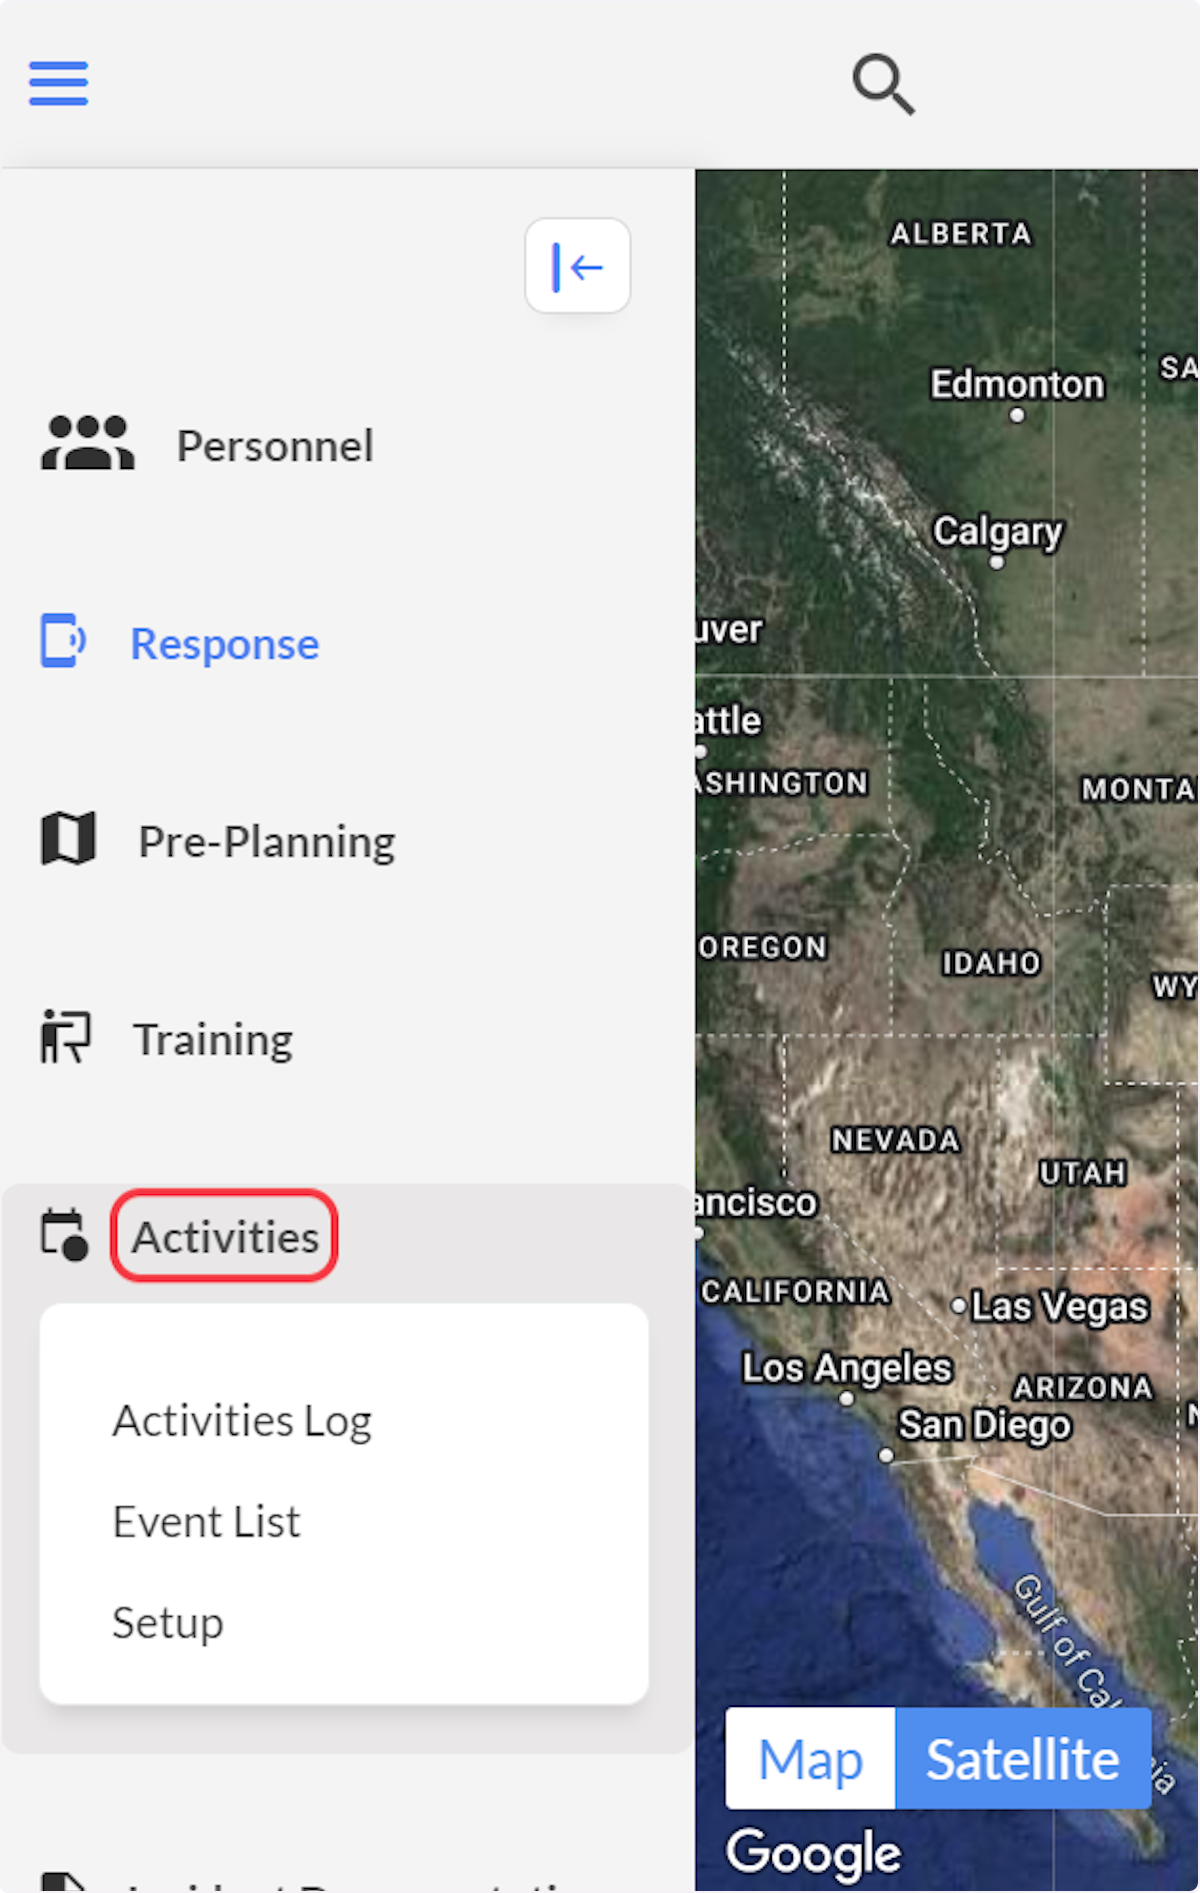 Click on Activities.